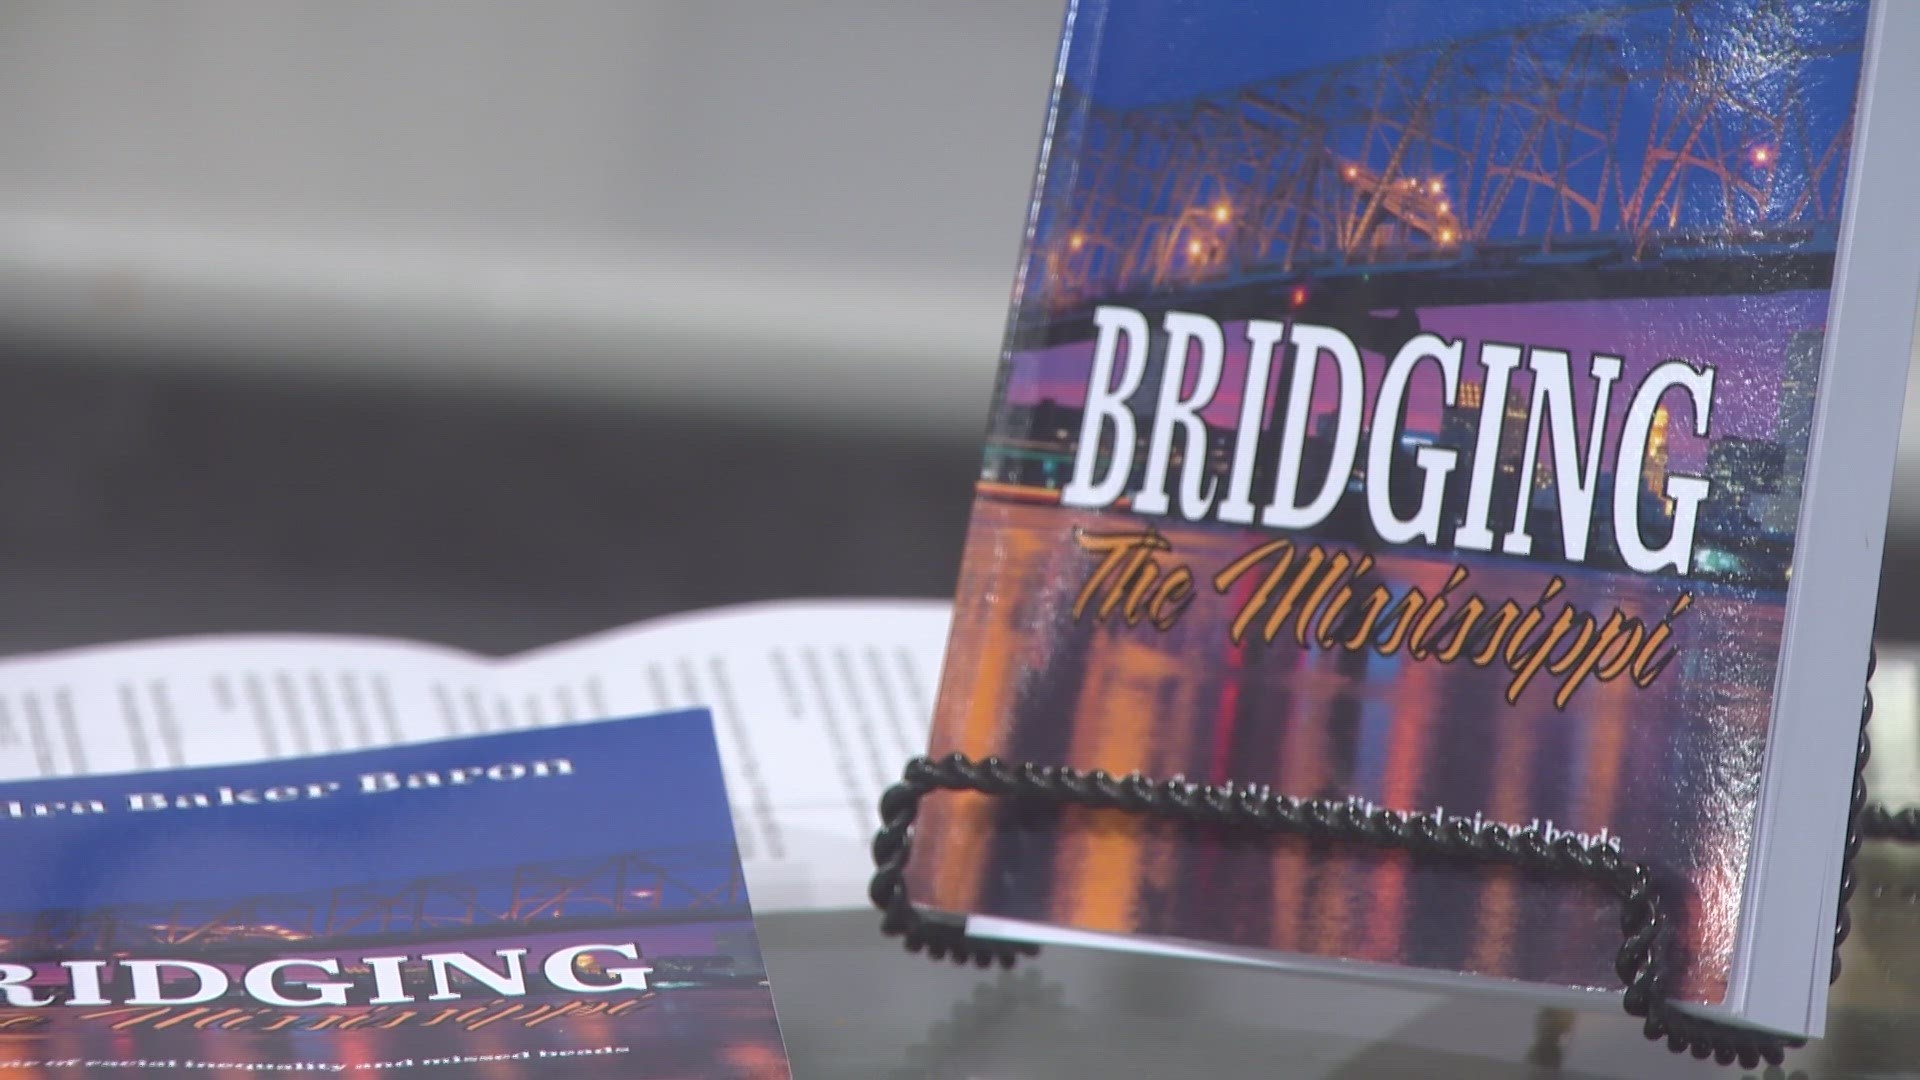 Author Sandra Lee Baron and a former student of the teacher and protagonist of "Bridging the Mississippi" tell us about this inspiring story.